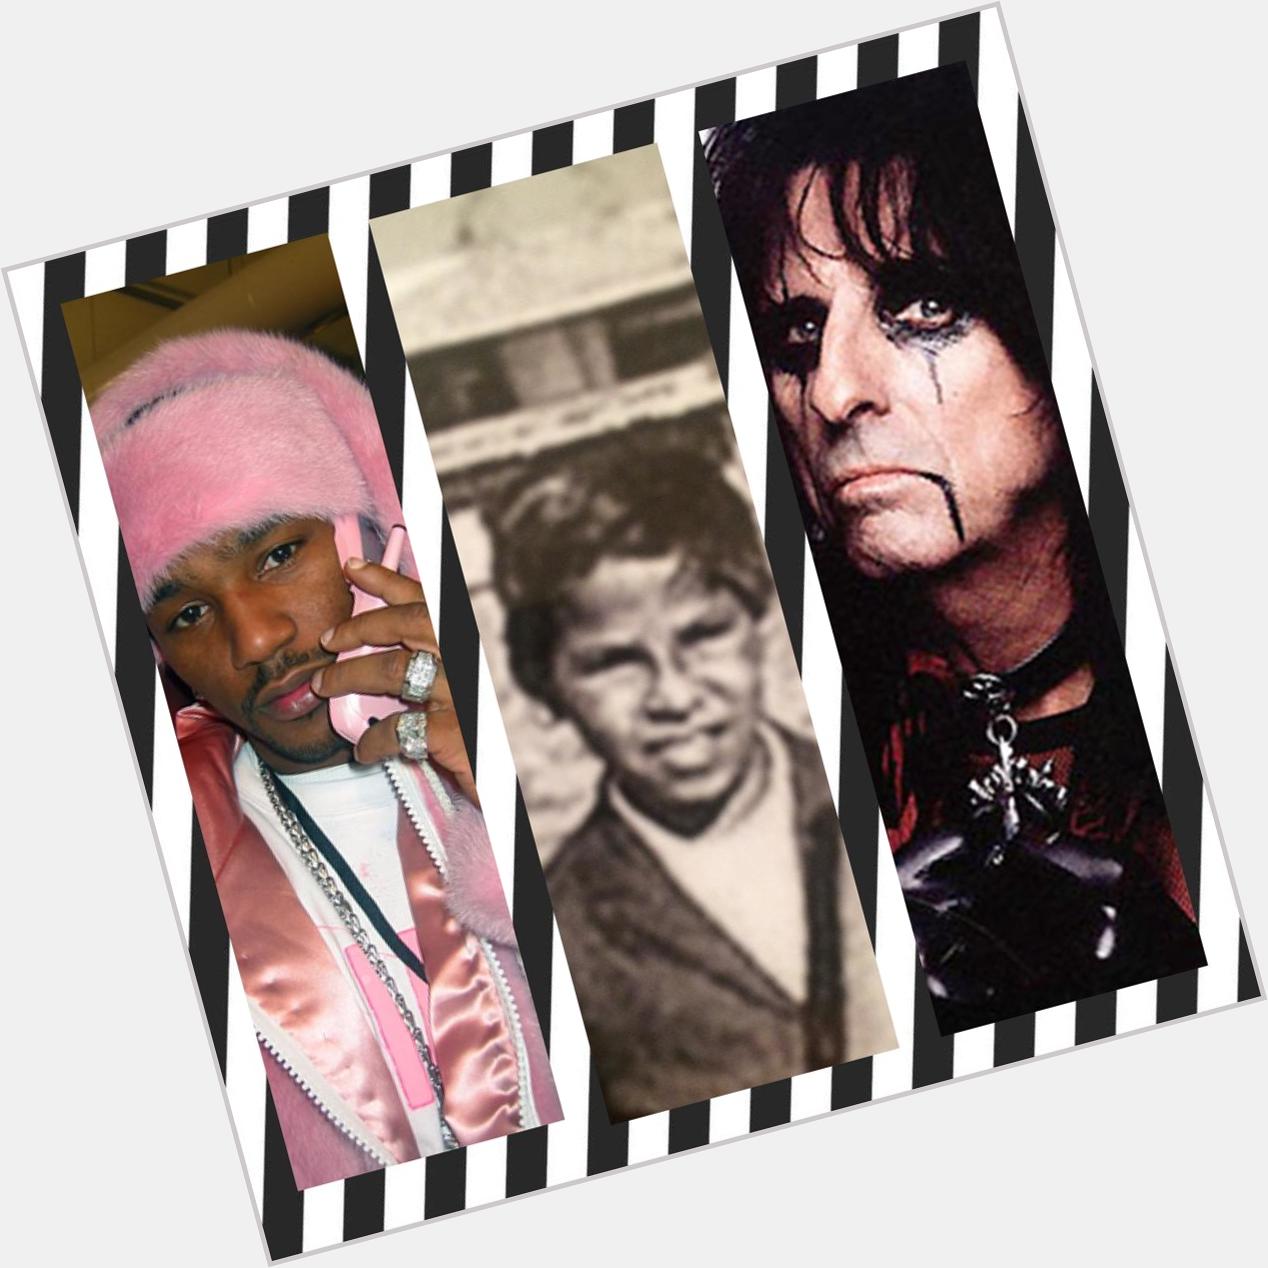 Also, happy birthday to Cam ron (Killa Cam!) and Alice Cooper (the Coop!) as well. 